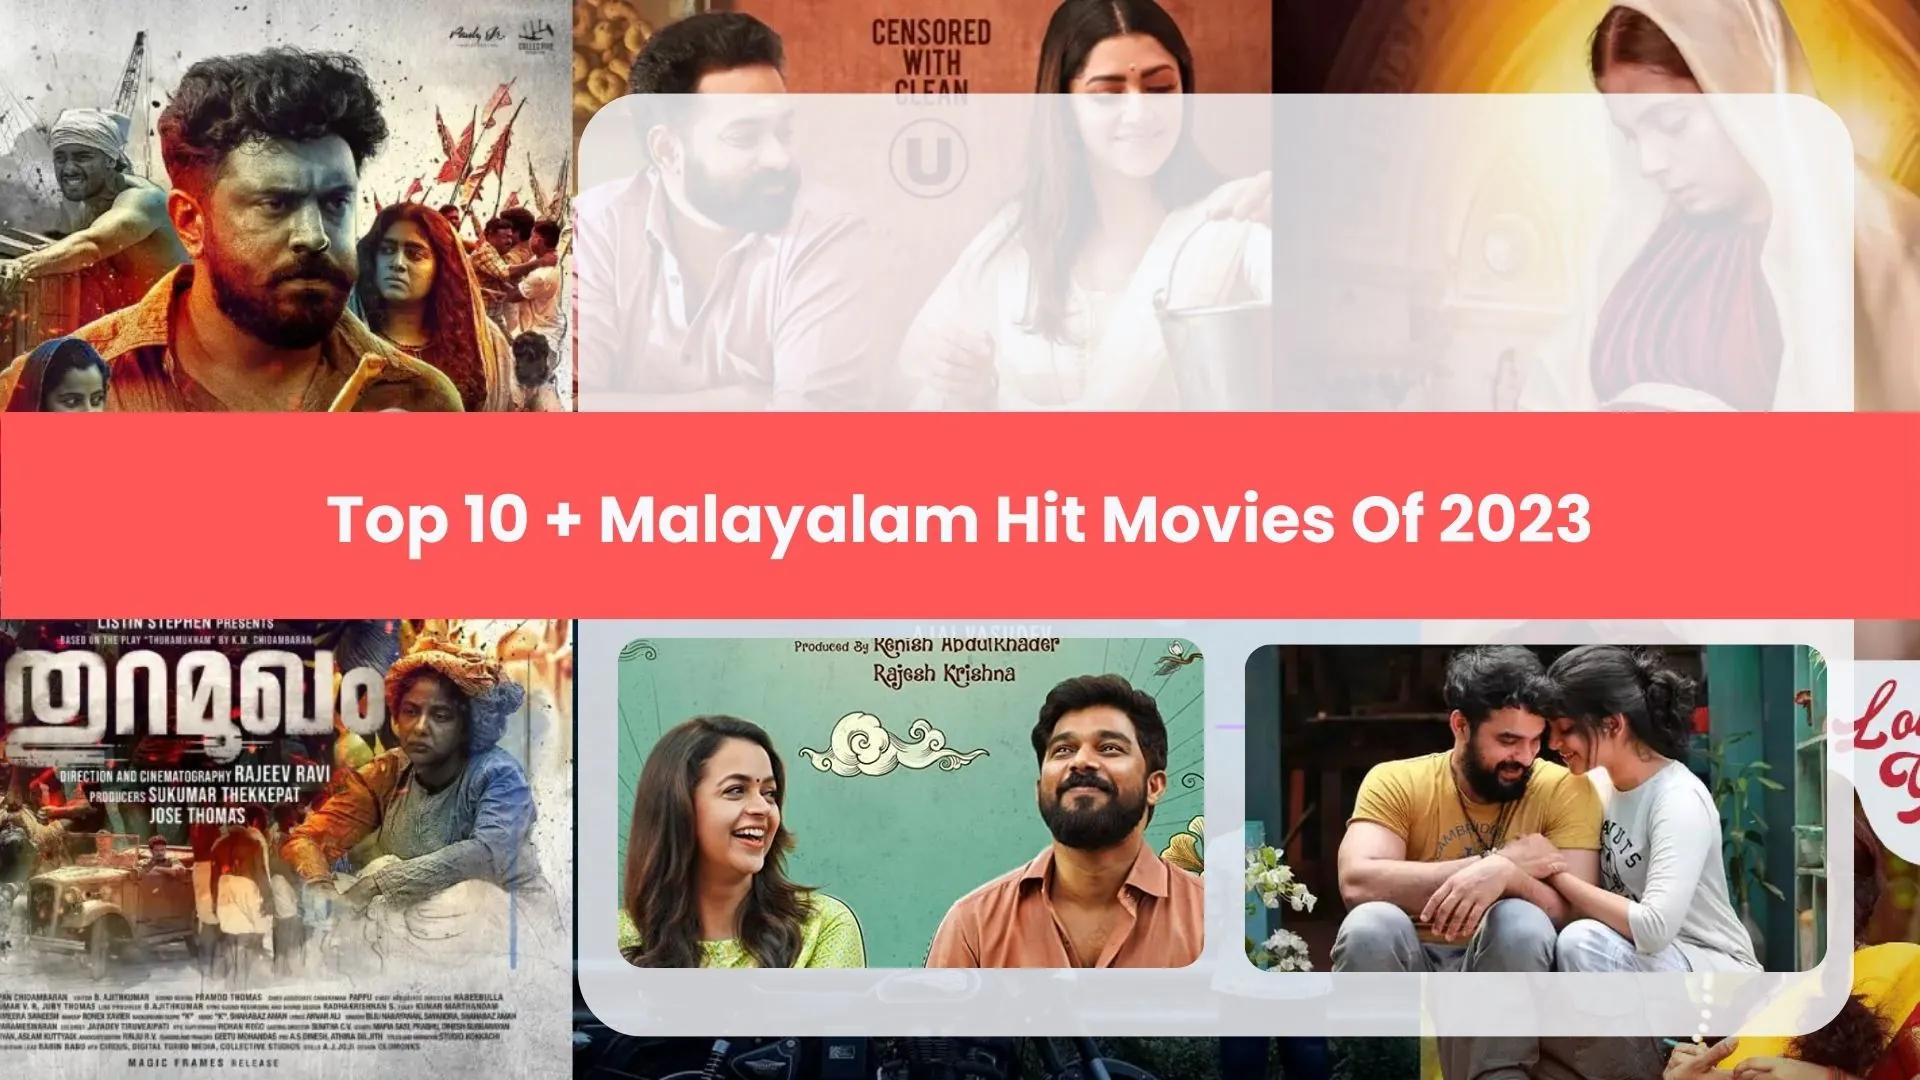 Top 10 + Malayalam Hit Movies Of 2023 Prepare to Be Amazed!